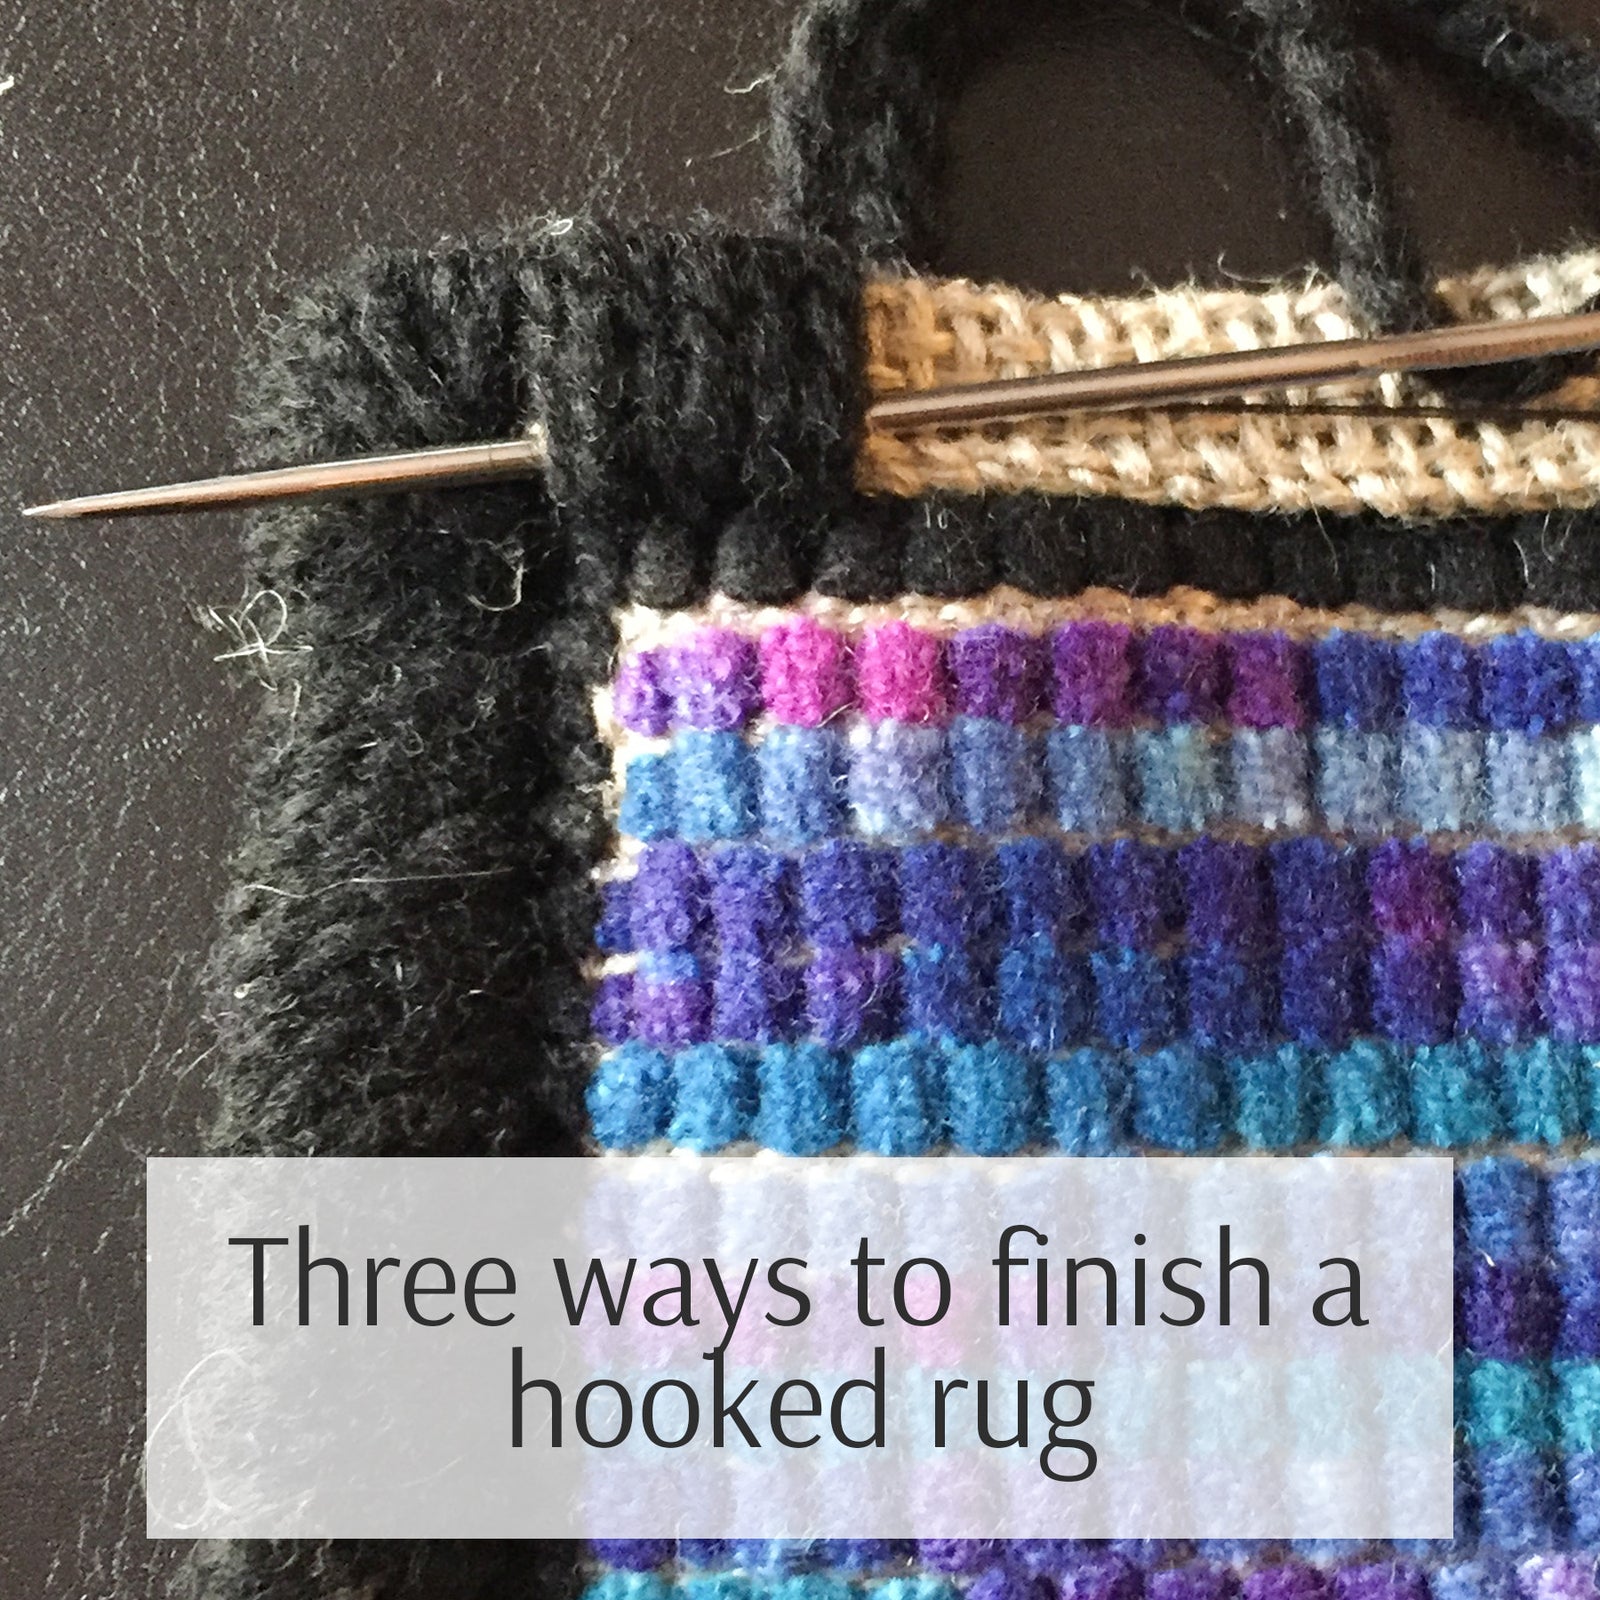 Finishing edges on a rug hooking project - Loopy Wool Supply